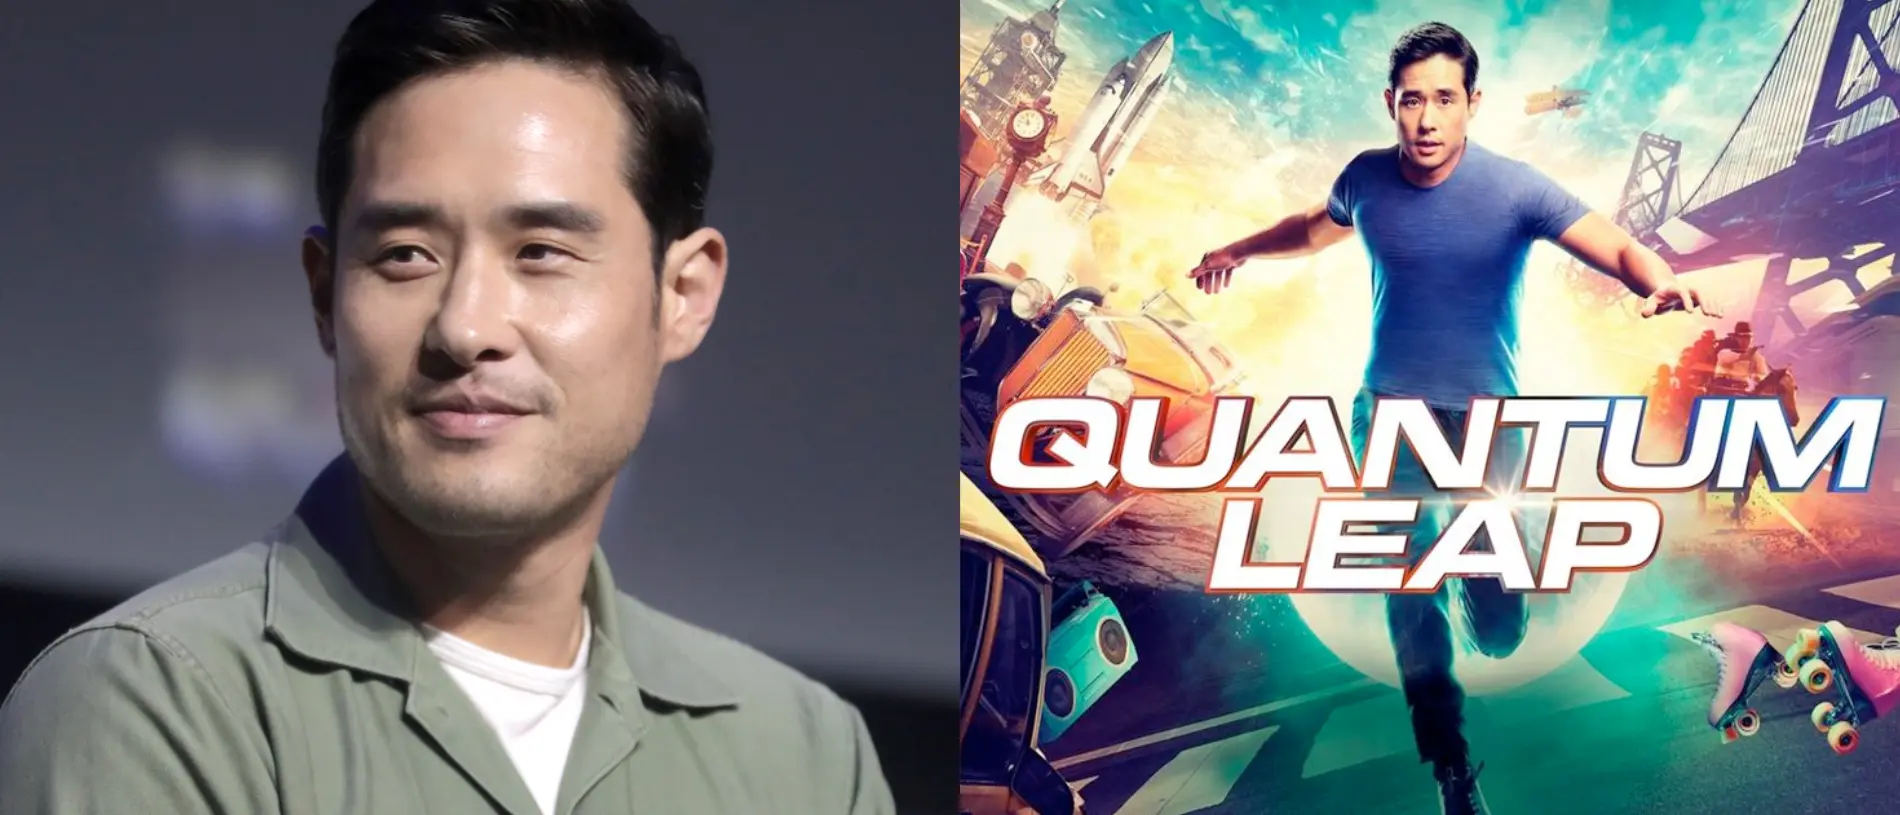 You are currently viewing Protagonista de “Quantum Leap”, Raymond Lee, na Comic Con Portugal